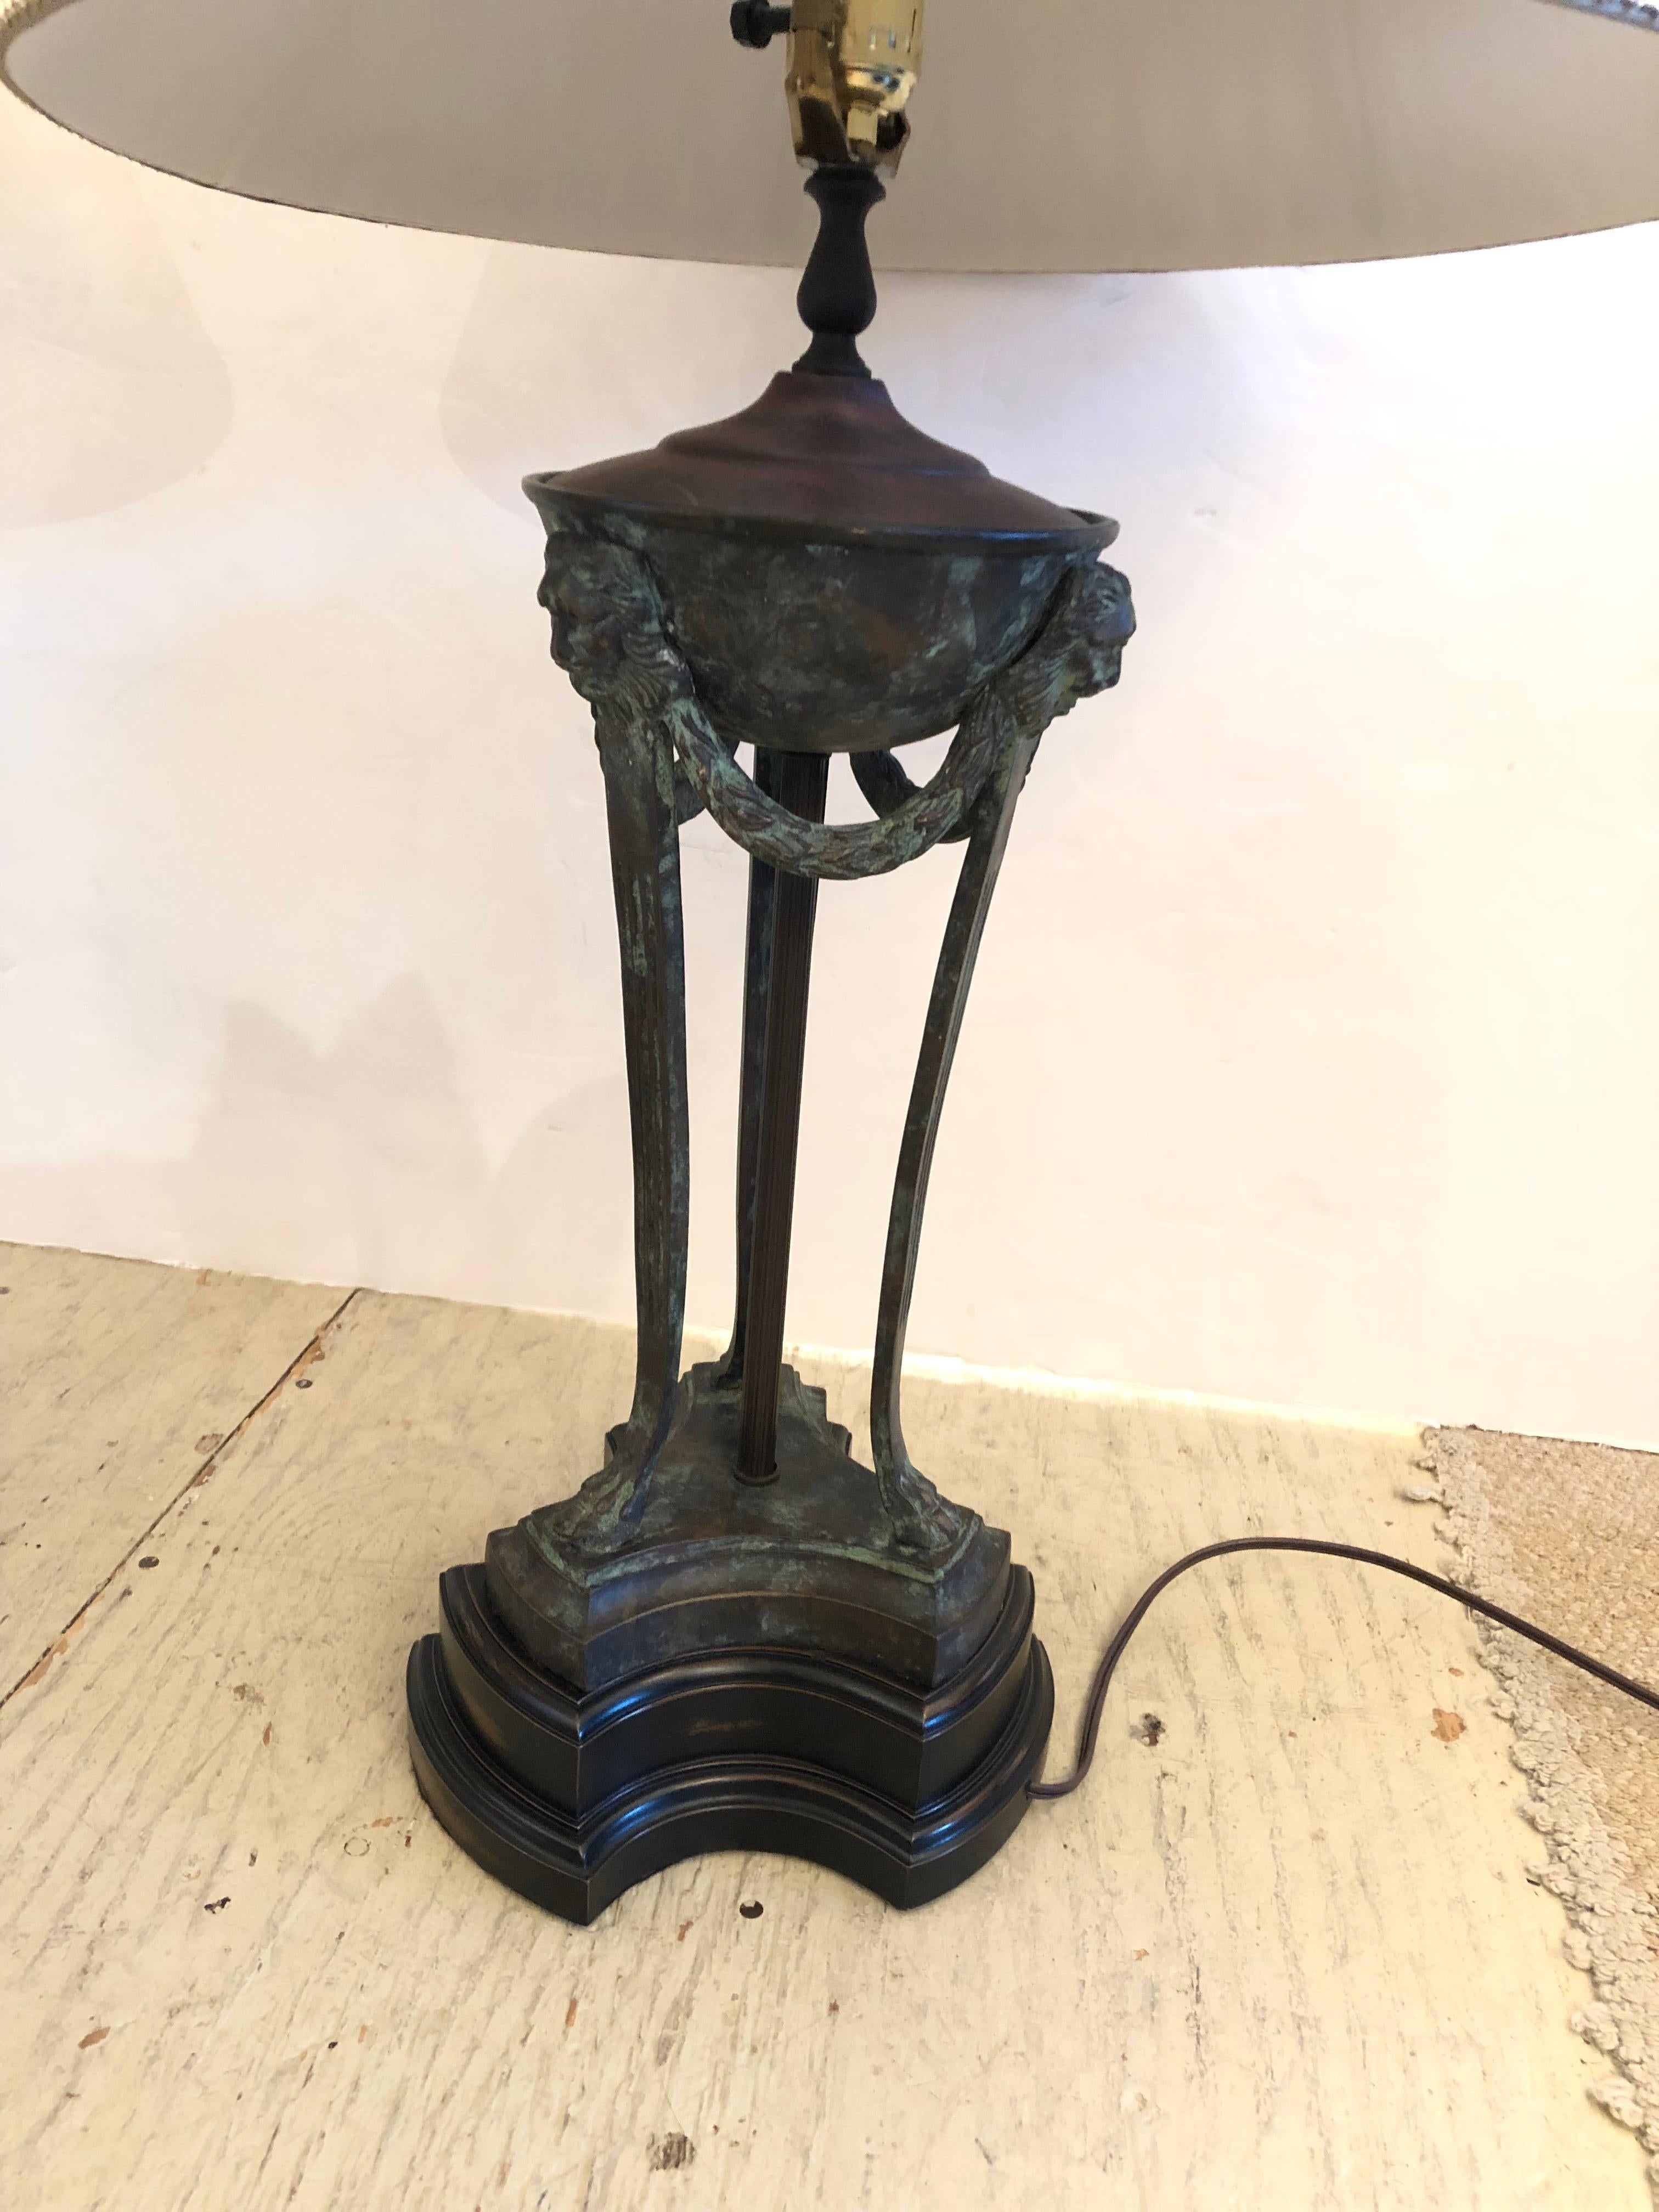 Fancy and elegant pair of neoclassical table lamps having bronze swags, lions heads and paw feet with verdigris patina on a black base. Custom shades are equally impressive having ornate pleats and X decoration around the bottom periphery.
Base is